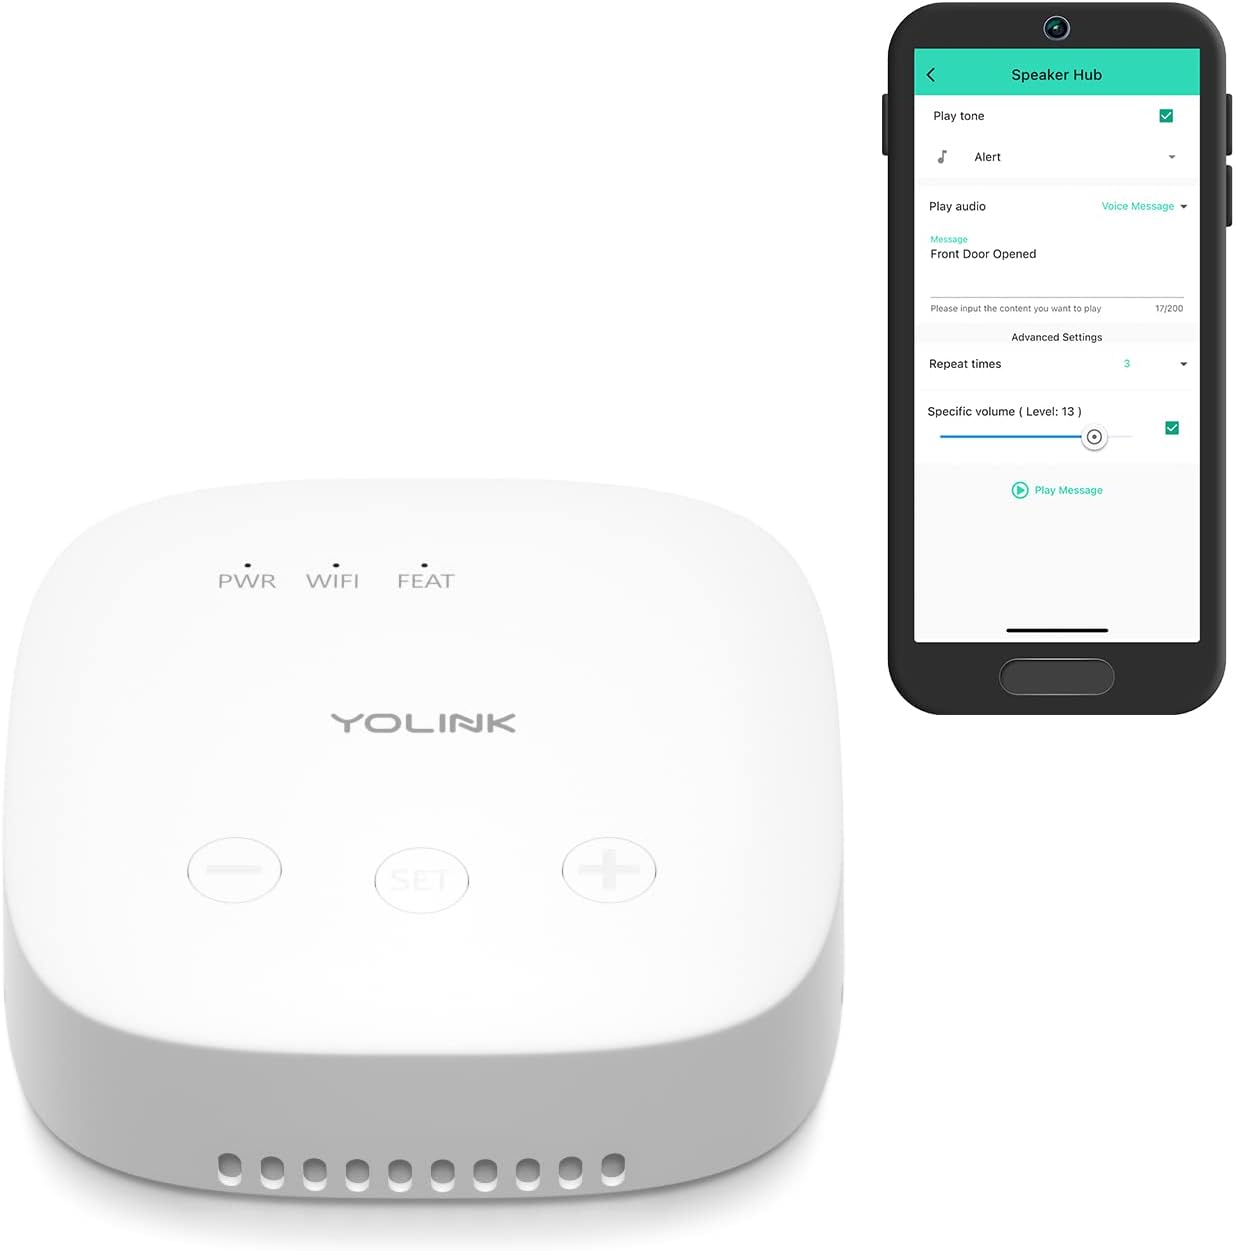 YoLink SpeakerHub – Smart Home Speaker Hub, Plays Tones/Alarms and Your Text-to-Speech Custom Messages, Voice Announcements, Audio Voice Alert, Spoken Alerts, LoRa-Powered ¼ Mile Range, WiFi Required